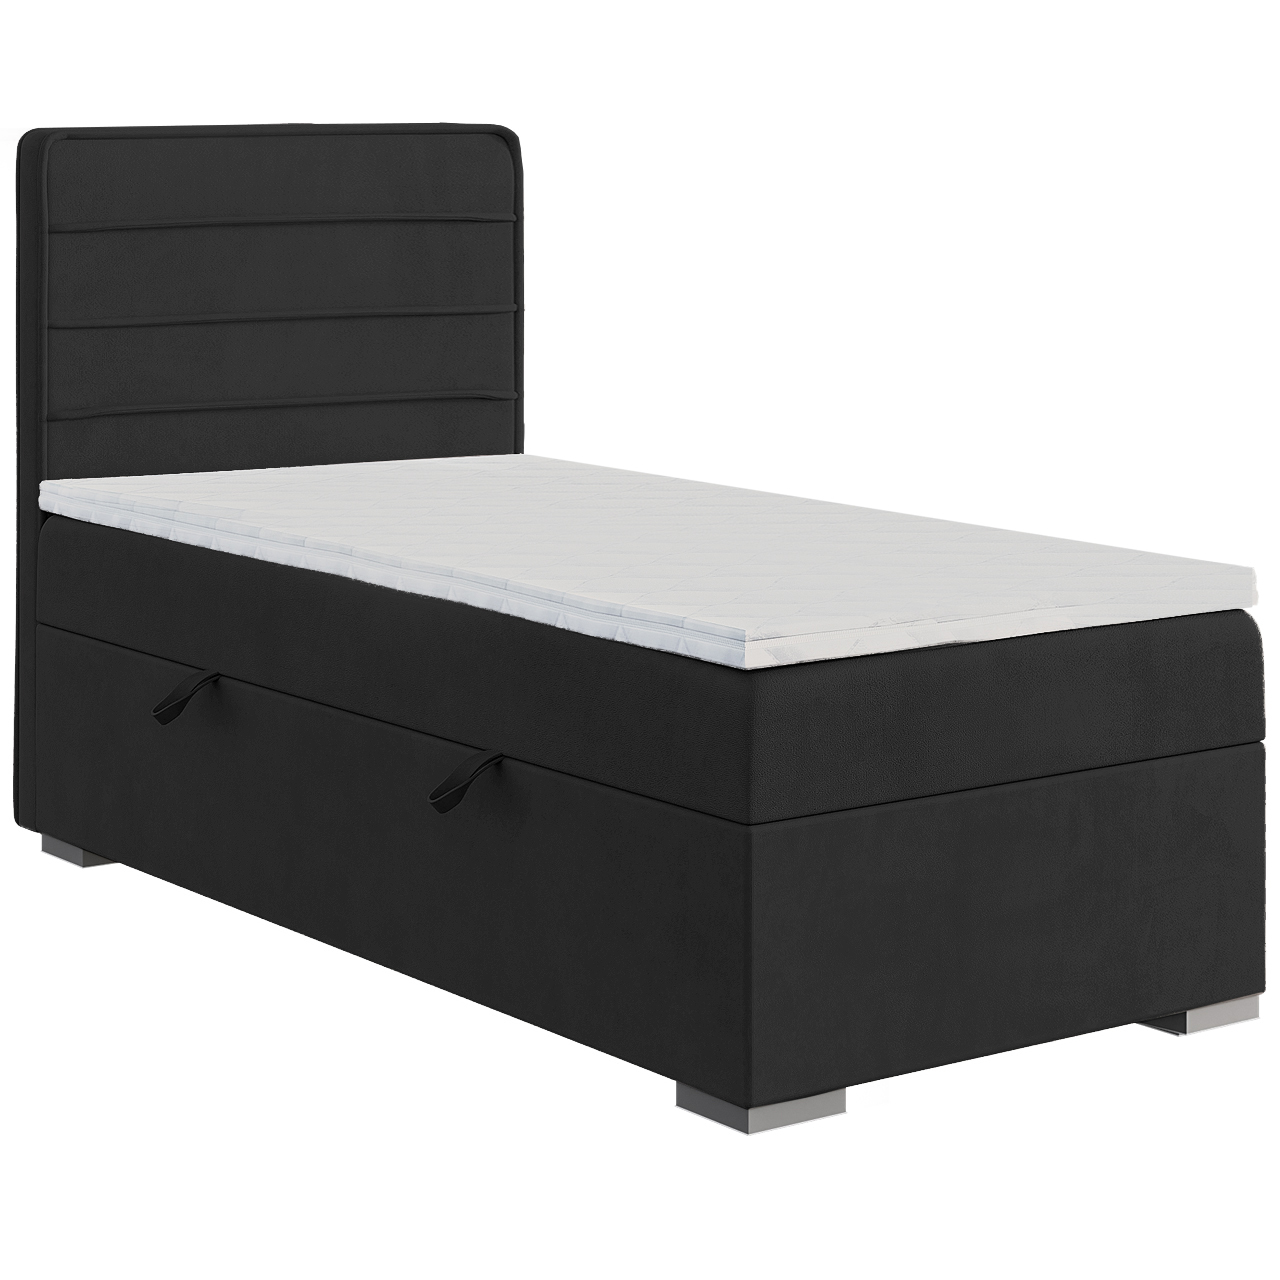 Upholstered bed BEROTTI 90x200 left riviera 100